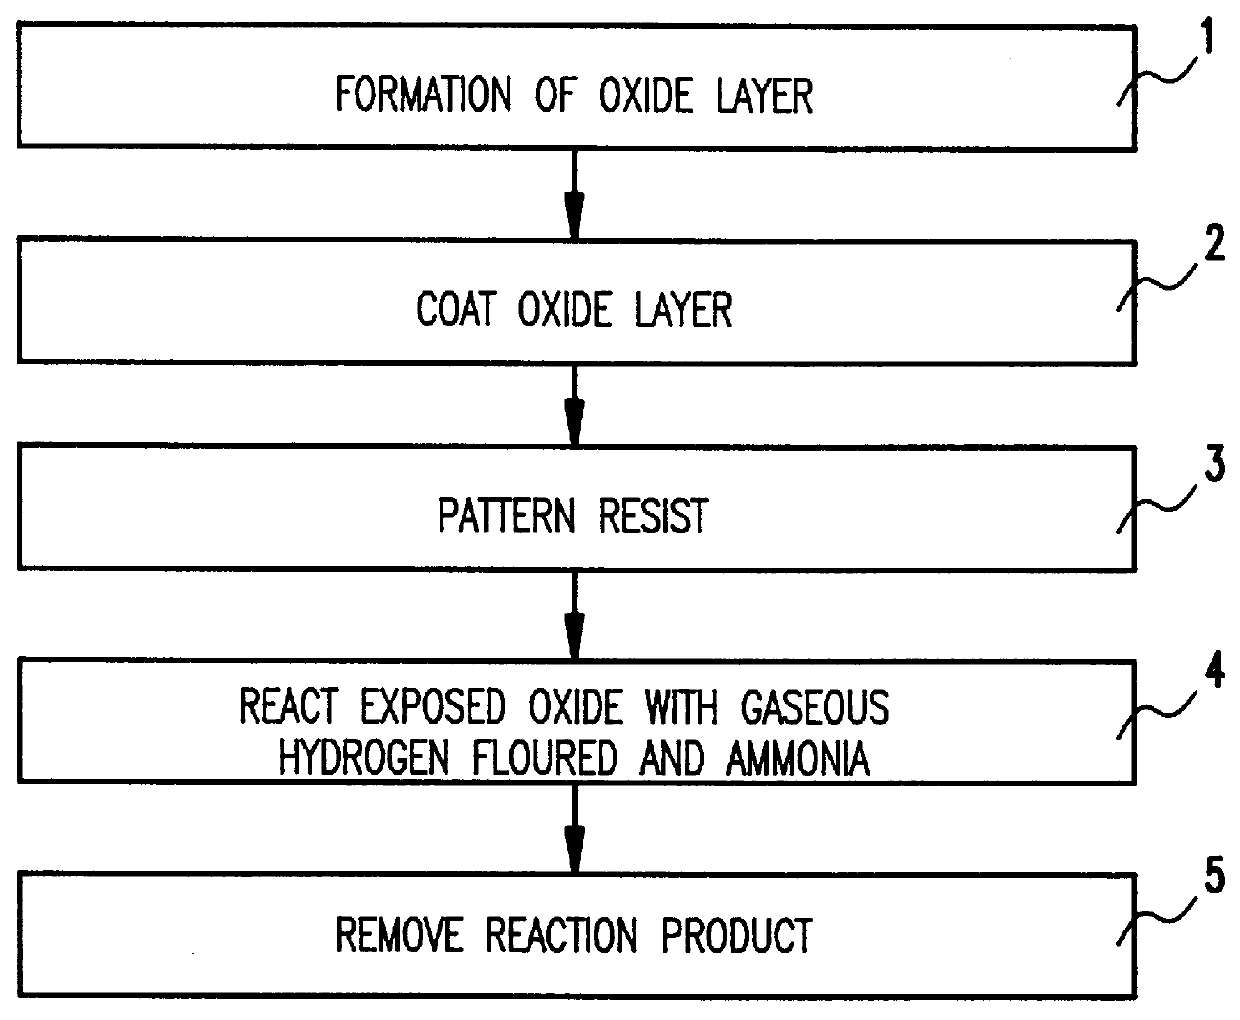 Vapor phase etching of oxide masked by resist or masking material